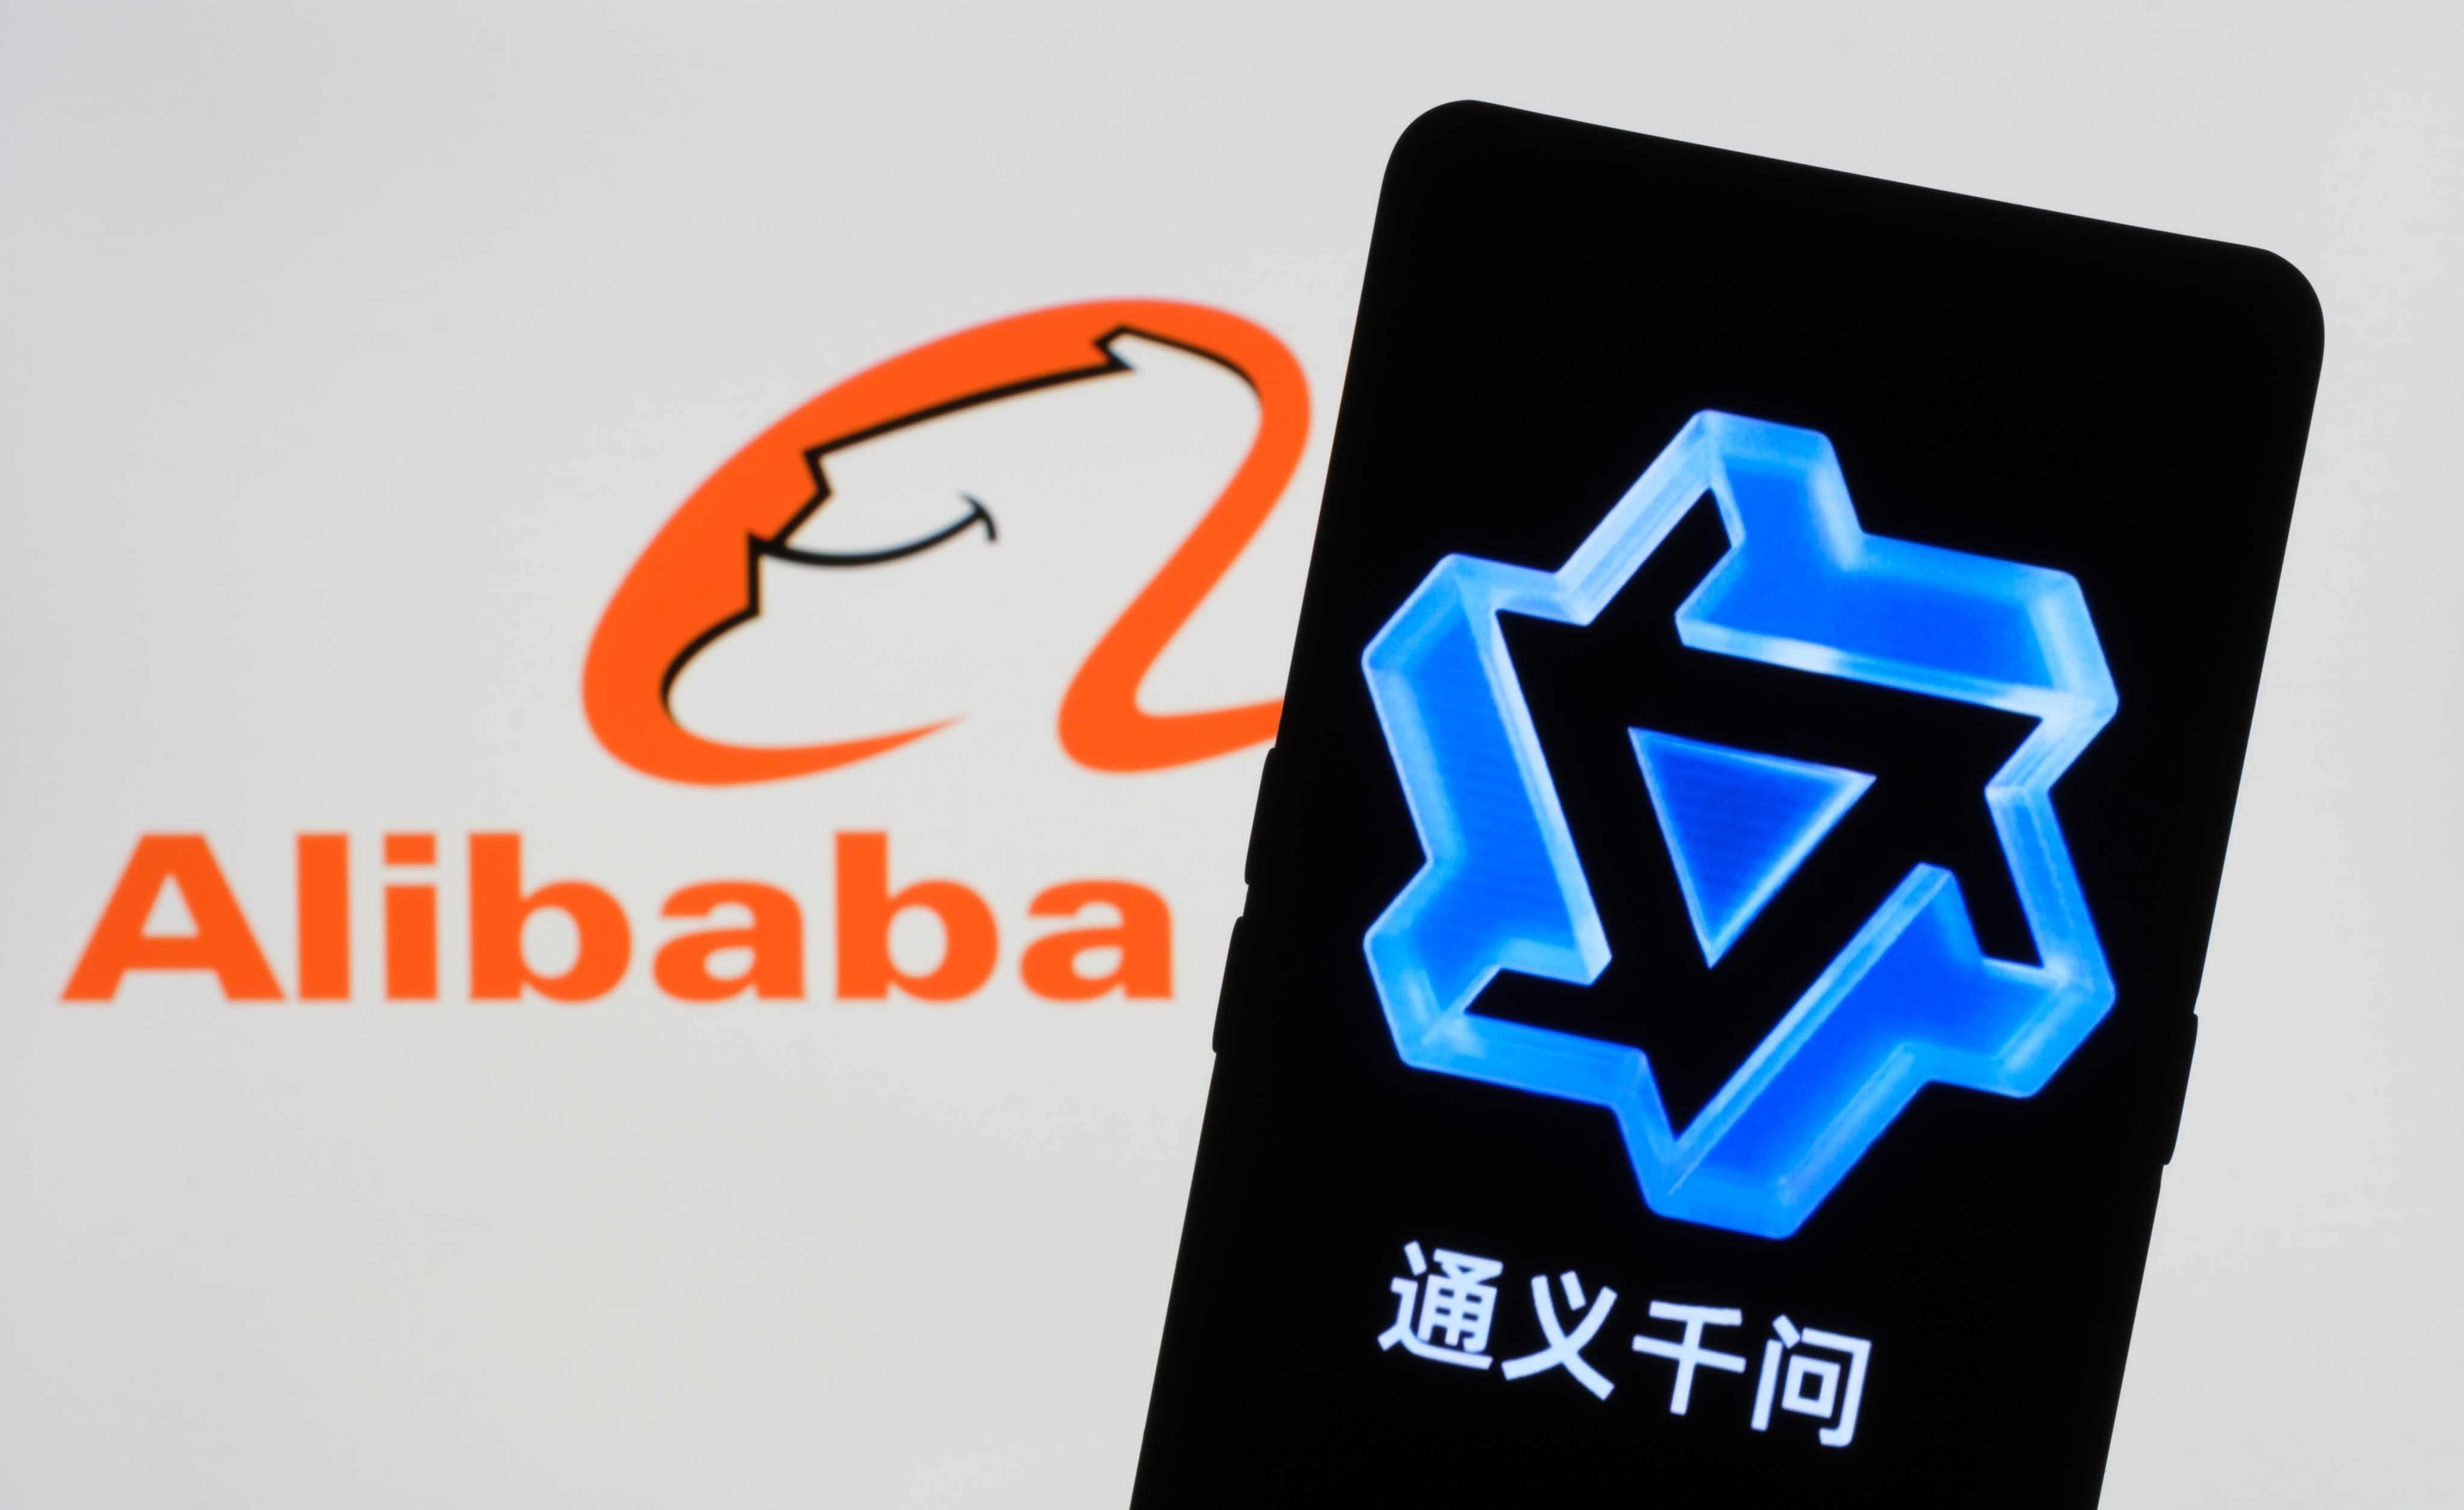 Alibaba is touting the advantages of its latest Tongyi Qianwen model, saying it rivals the sophistication of Llama 3, the open-source model from Facebook owner Meta Platforms. Photo: Shutterstock